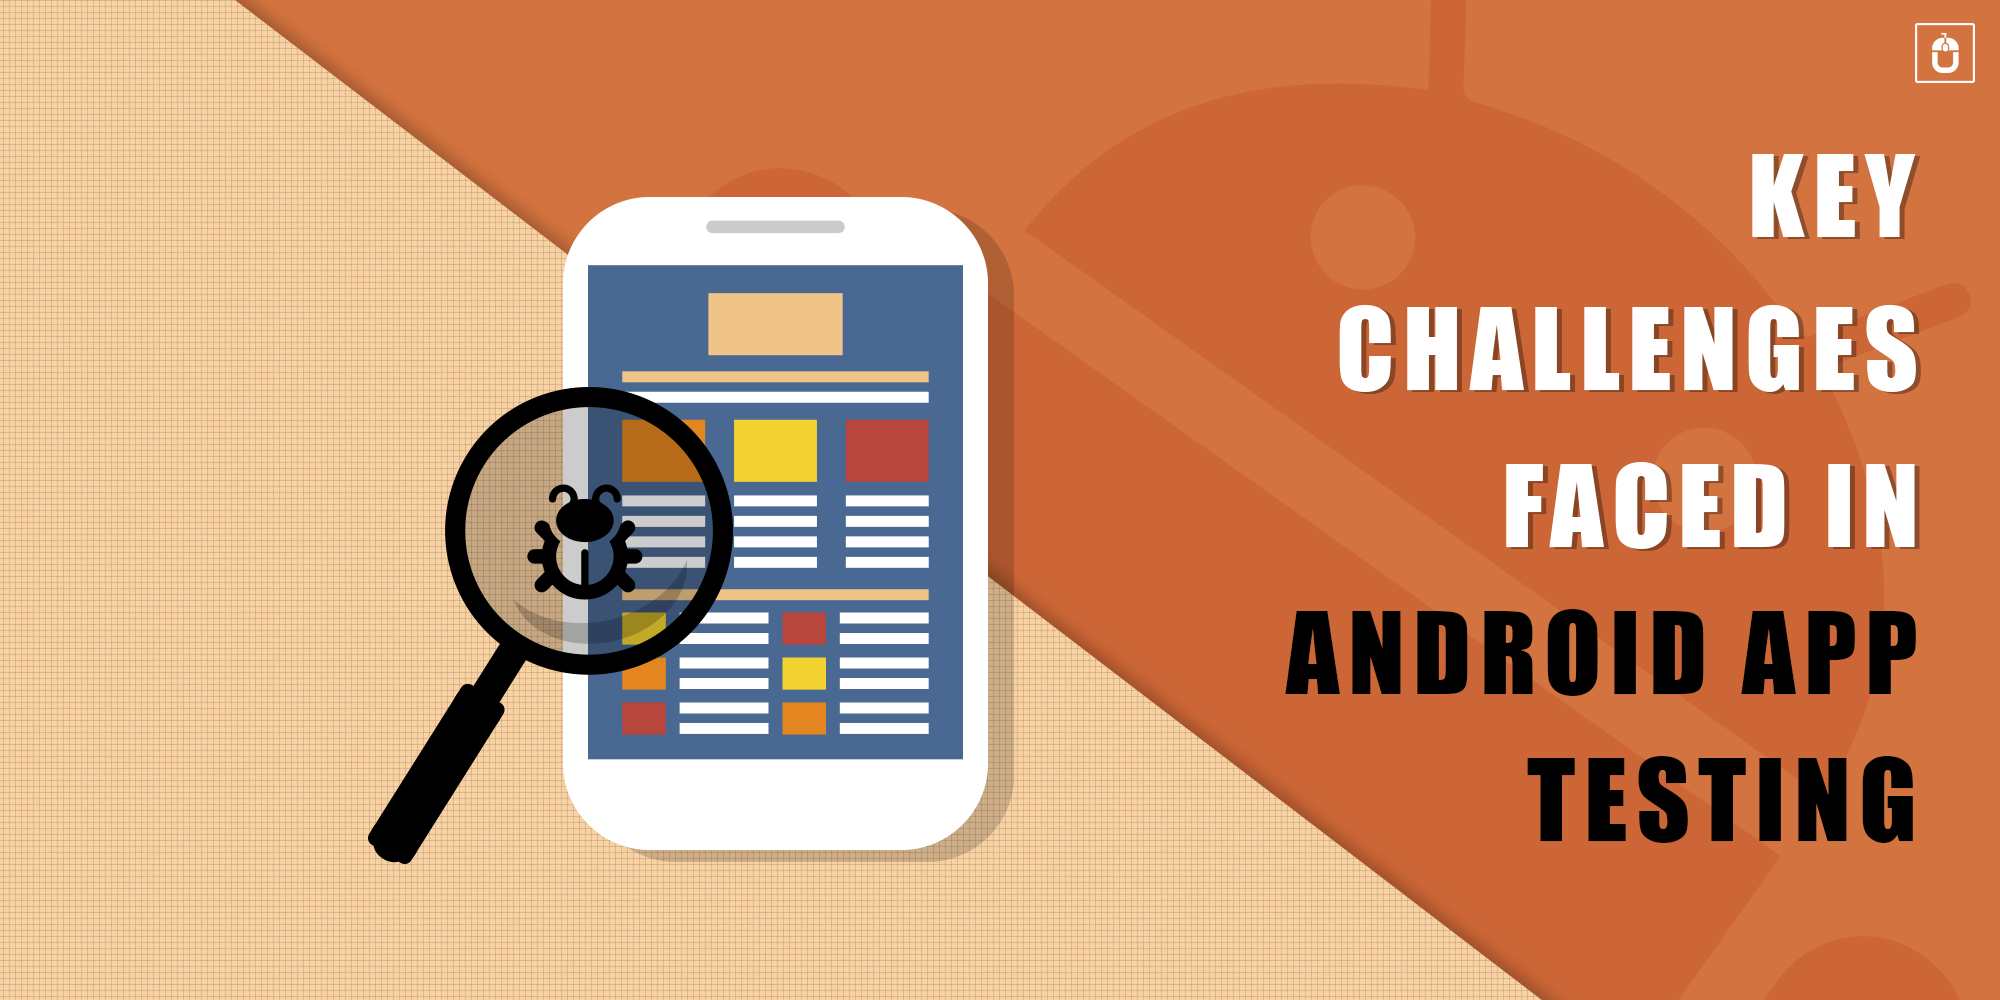 KEY CHALLENGES FACED IN ANDROID APP TESTING